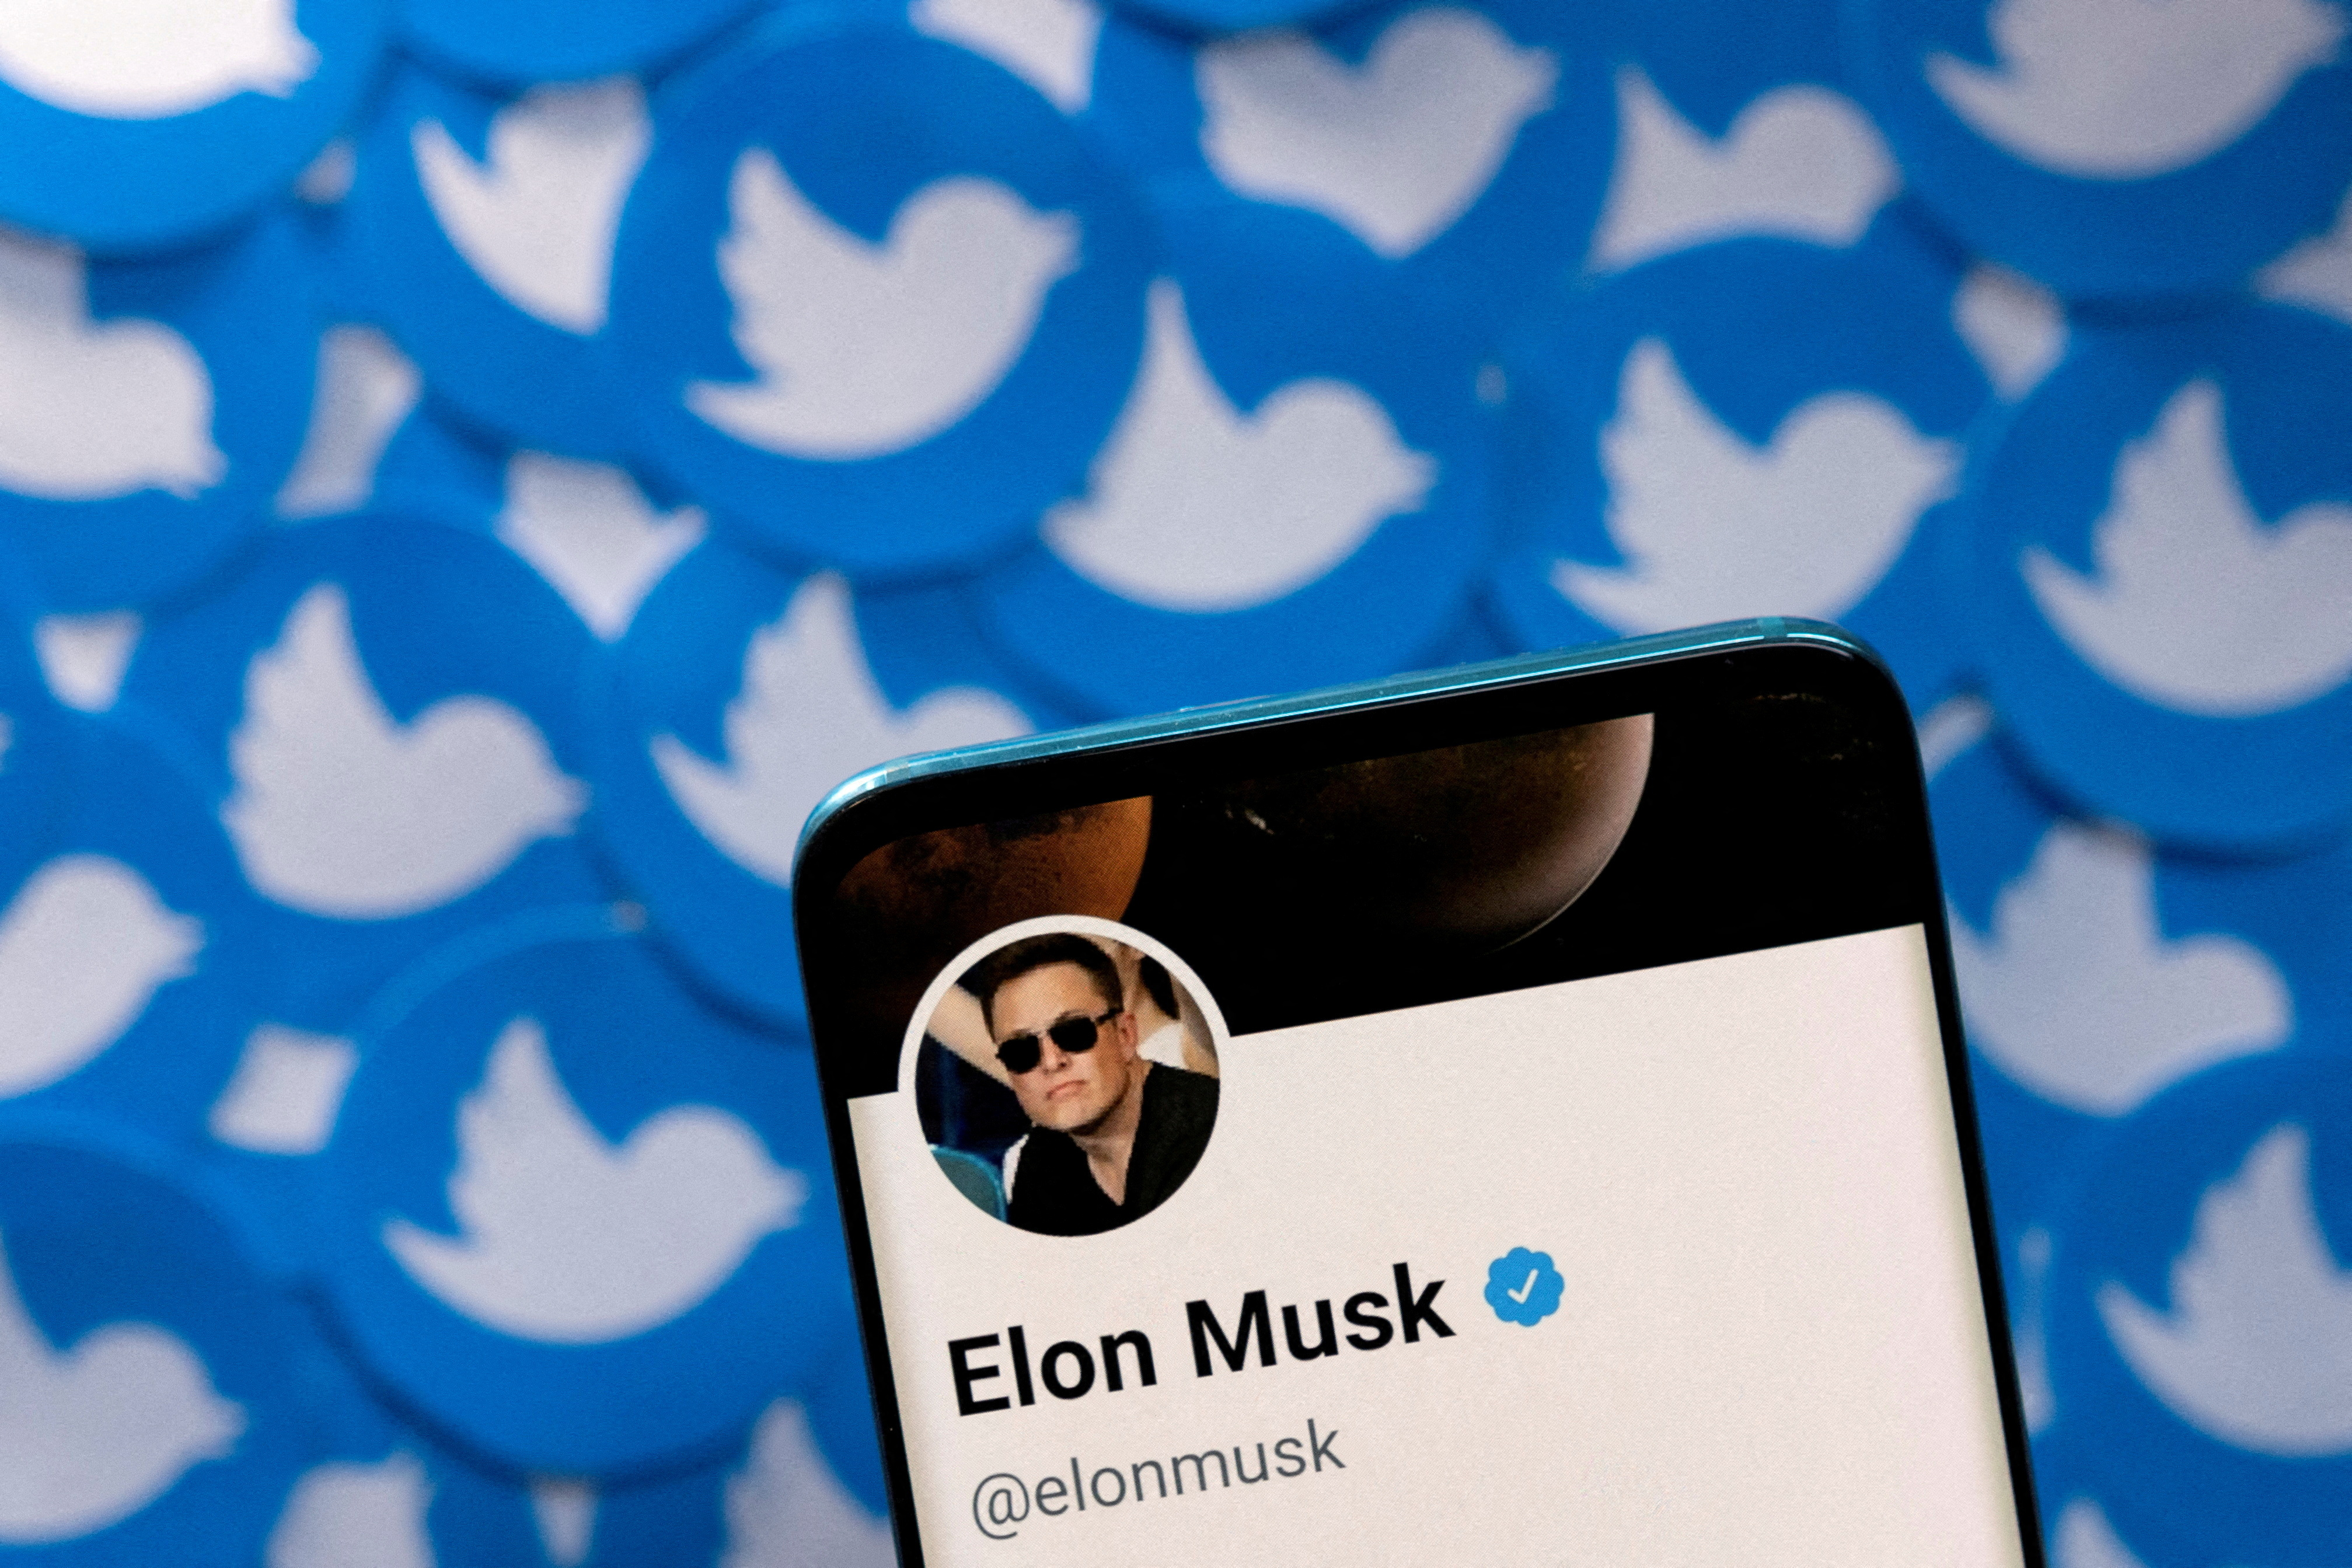 The illustration shows Elon Musk's Twitter profile on a smartphone and the Twitter logos printed